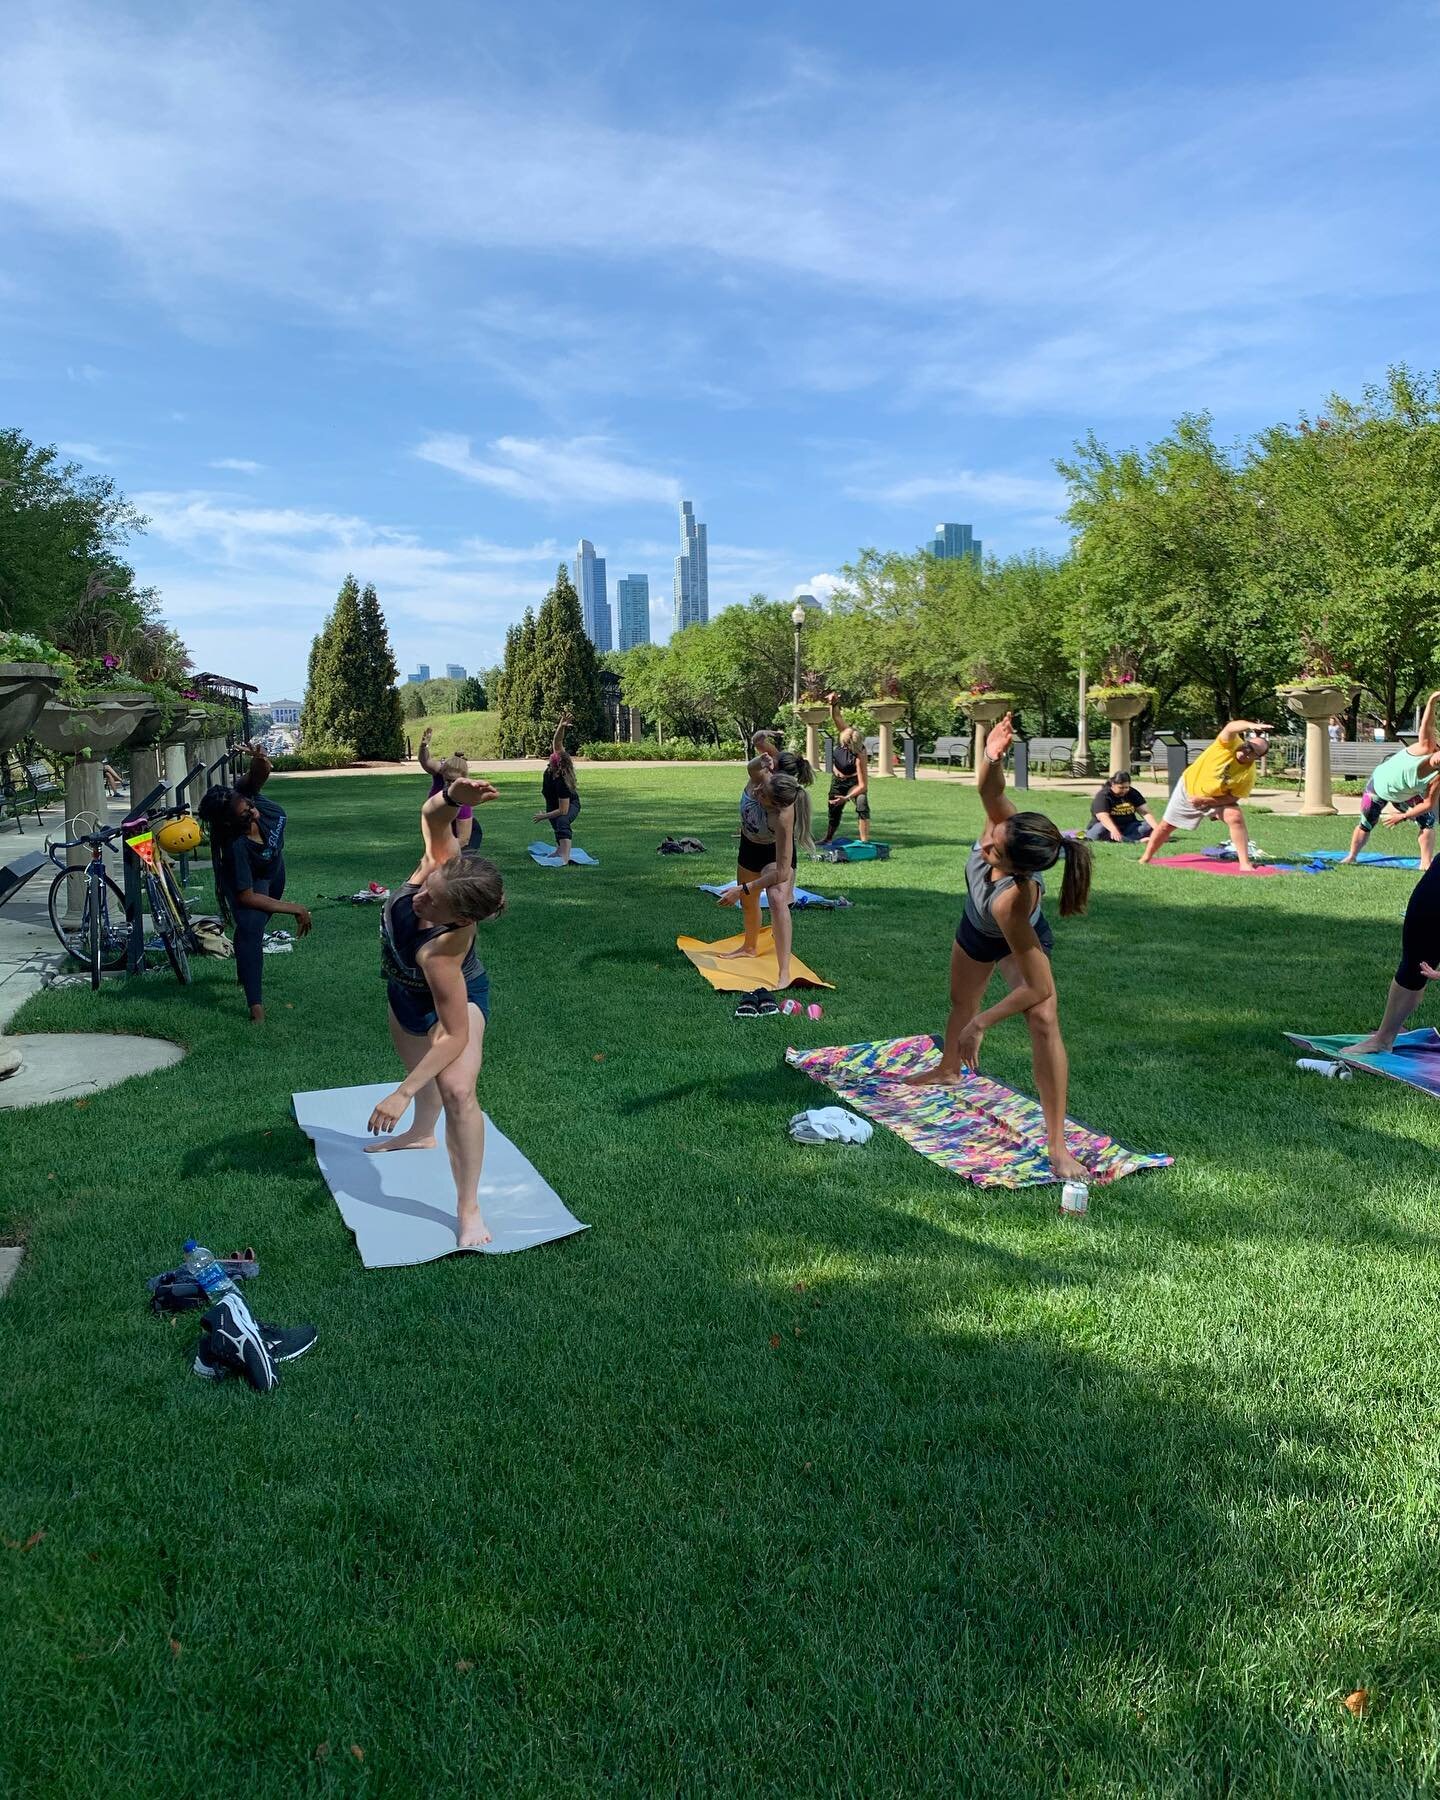 Thank you @studio_margot and @bloomyogastudio for leading our yoga practice at Maggie Daley park! Our next Flow with @RecoveryonWater is September 11 @ 9AM &amp; 10:30AM